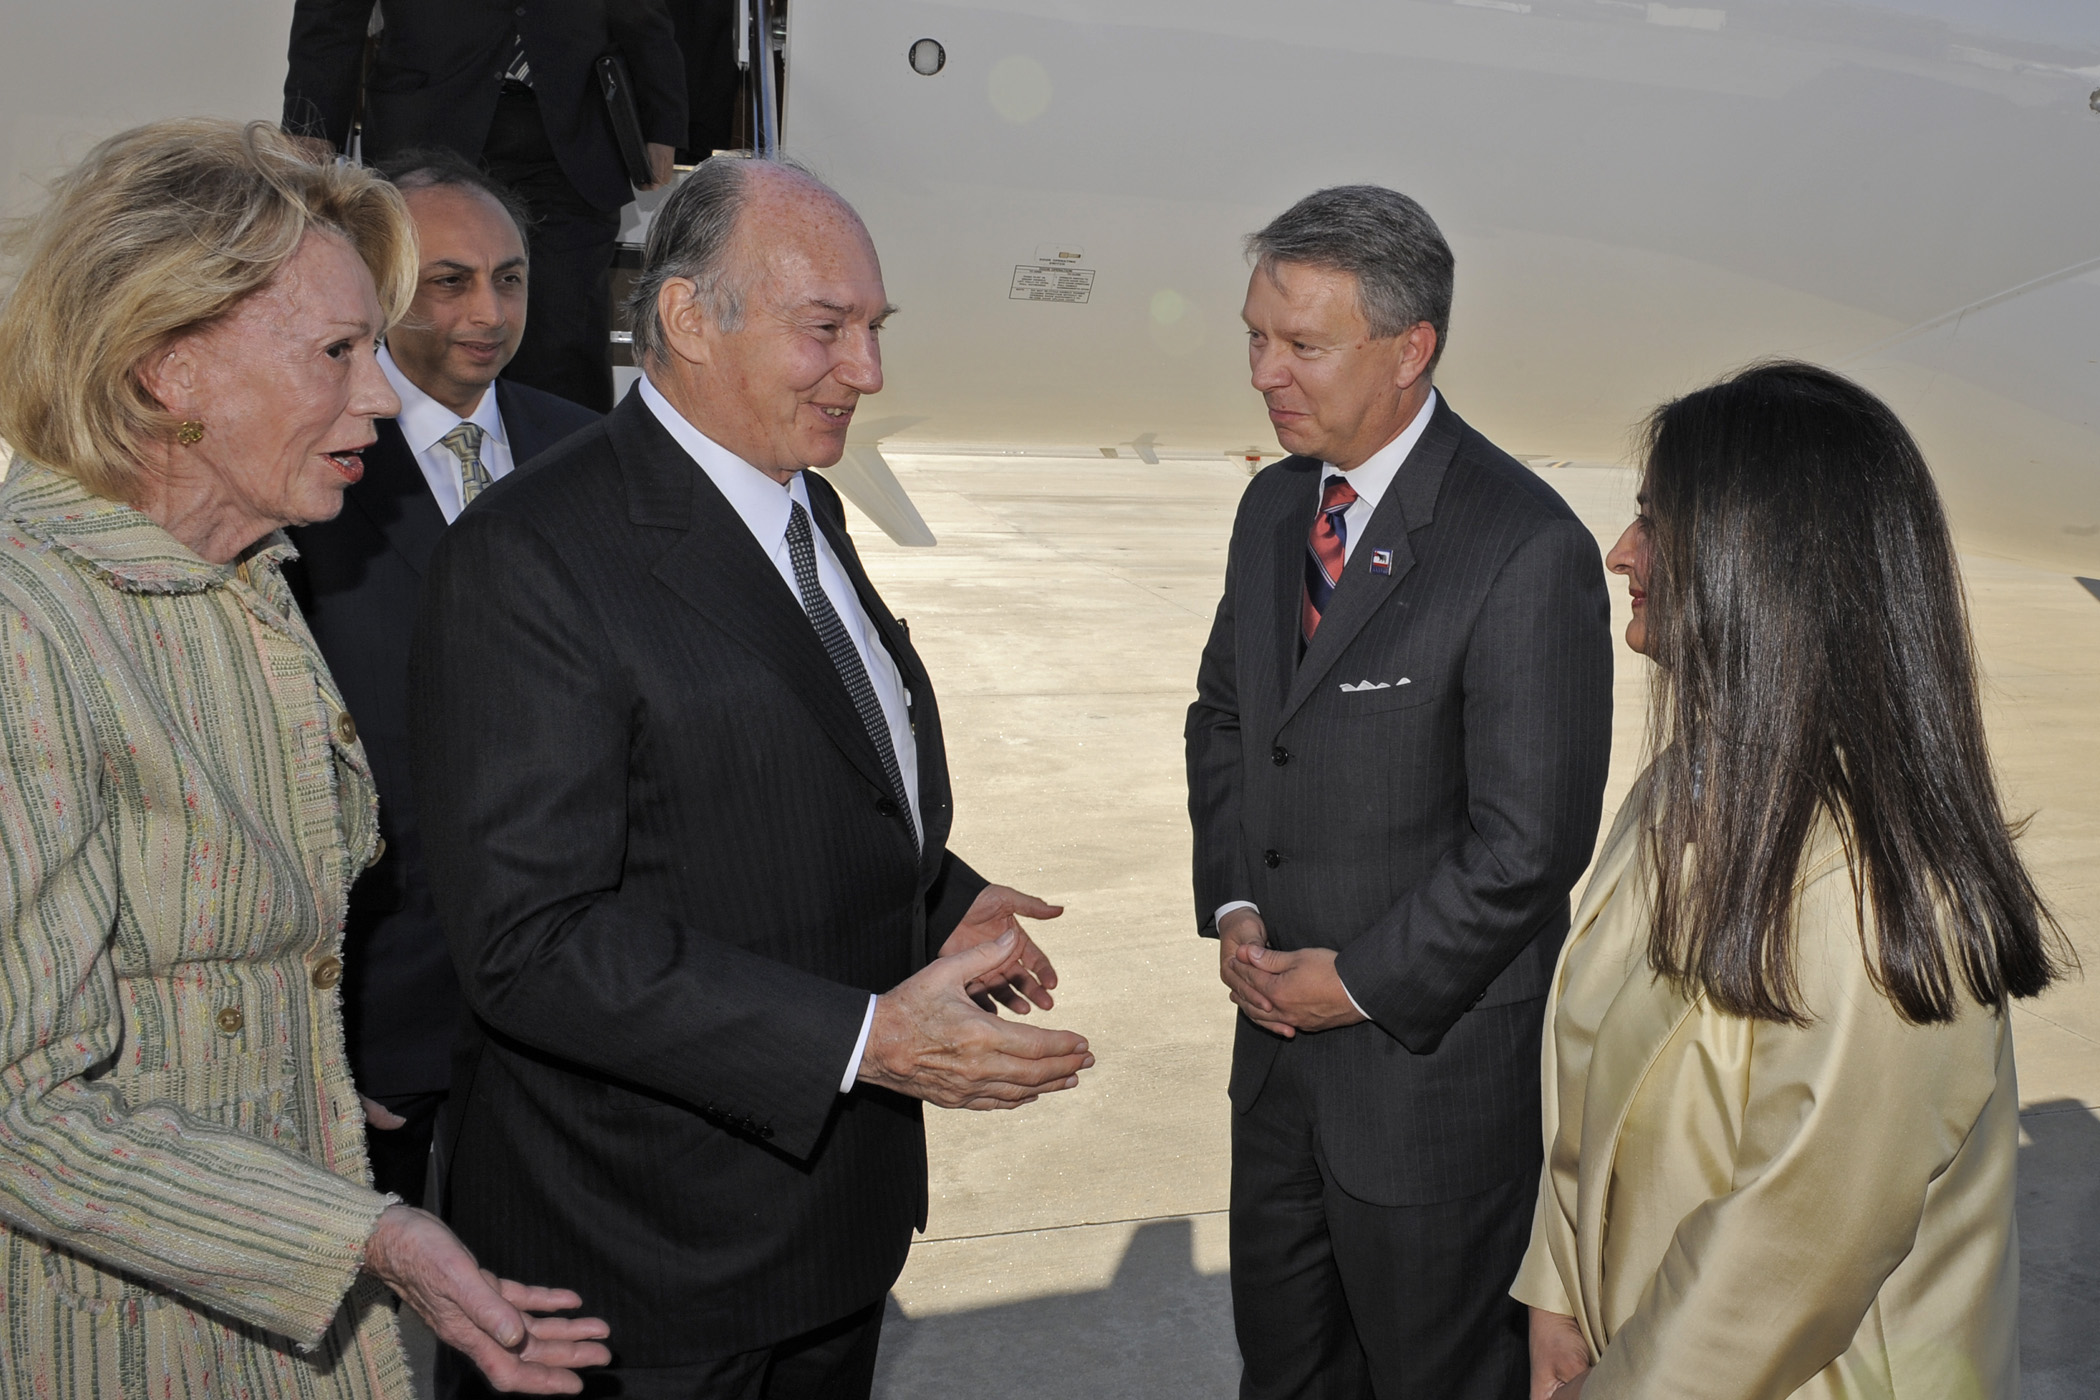 Upon arriving in Los Angeles, California, Mawlana Hazar Imam is greeted by Charlotte Schultz, Chief of Protocol and Will Fox, Deputy Chief of Staff from the office of the Governor of California, as well as President Samia Rashid and other leaders of the Ismaili Council for Western USA. Photo: Gary Otte